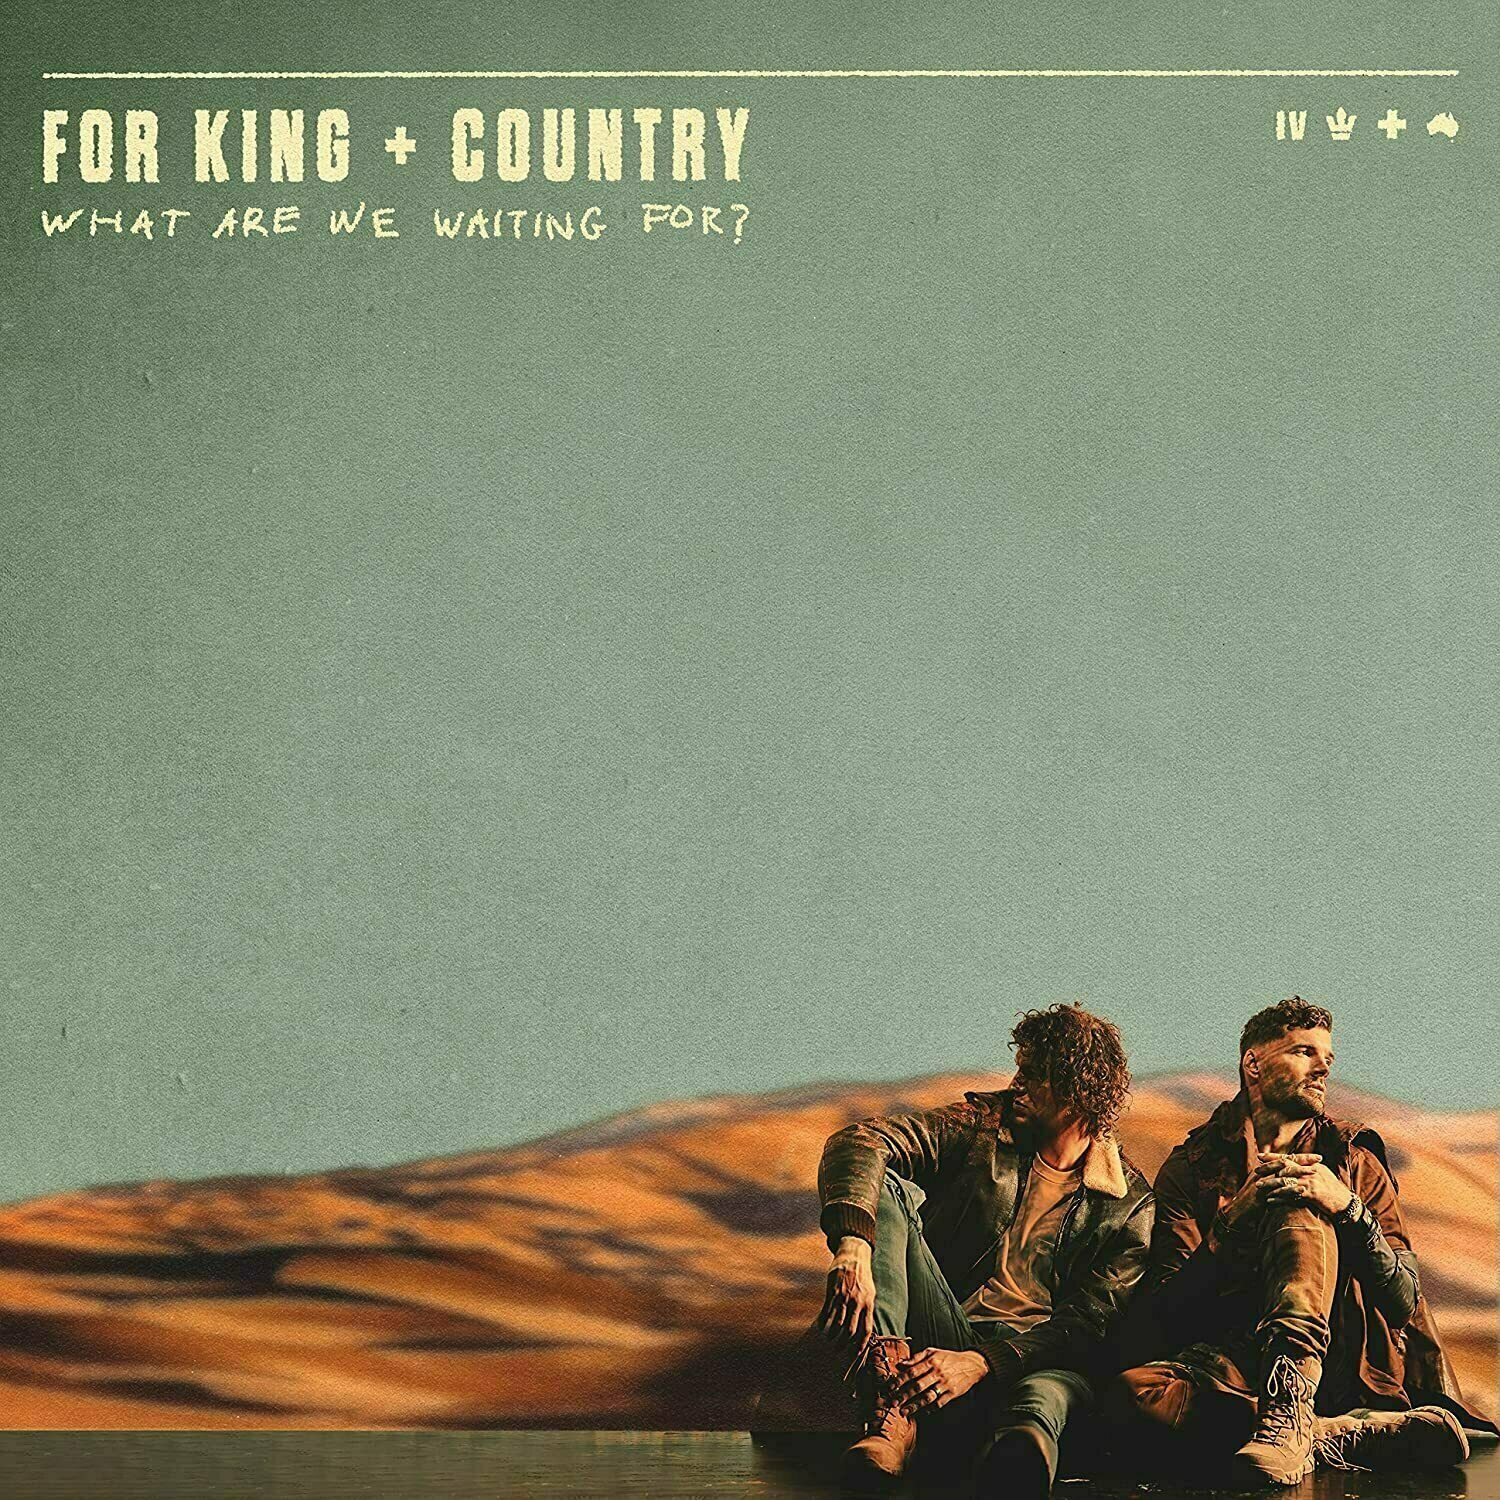 LP deska For King & Country - What Are We Waiting For? (2 LP)